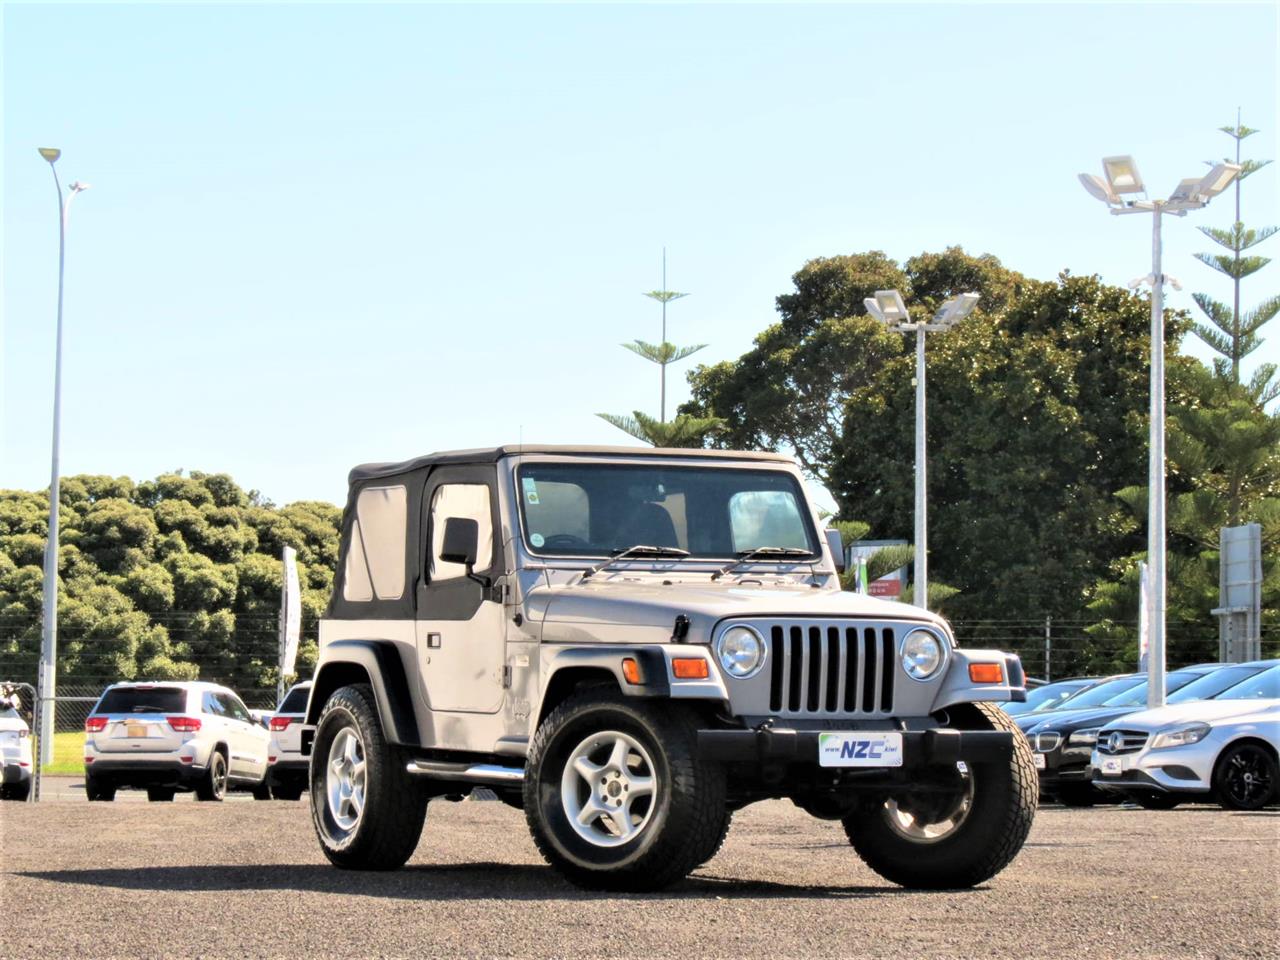 2000 Jeep WRANGLER REMOVABLE SOFT TOP + 4WD + NEW TYRES